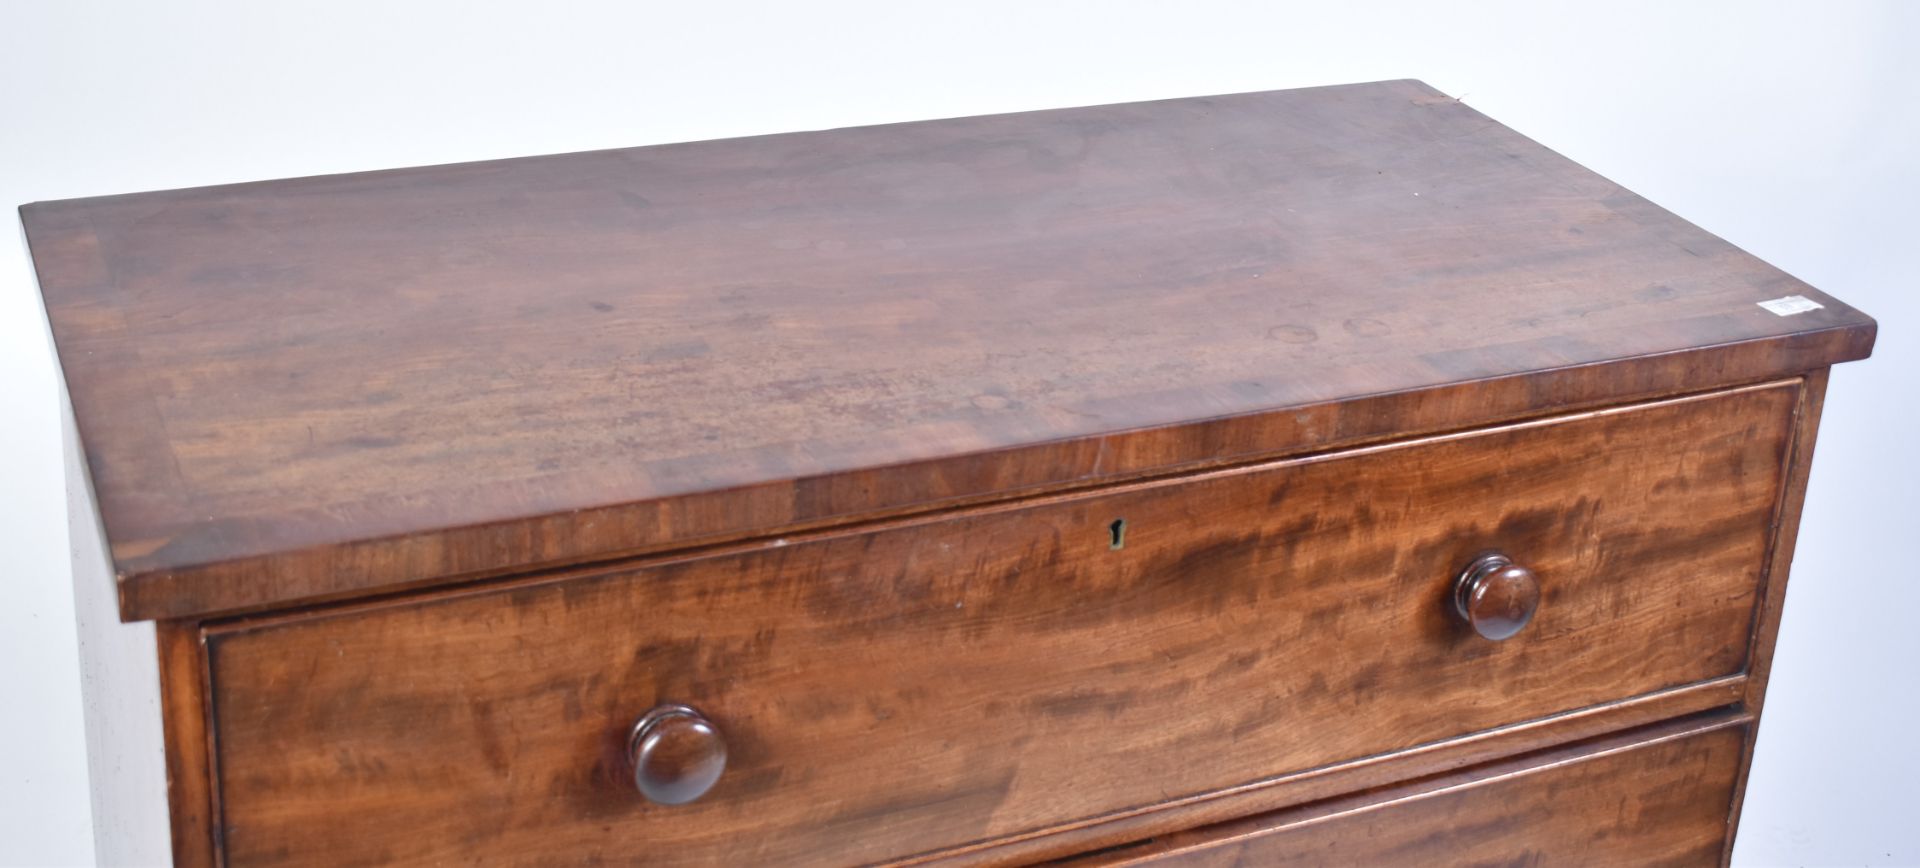 19TH CENTURY GEORGE III MAHOGANY CHEST OF DRAWERS - Image 4 of 5